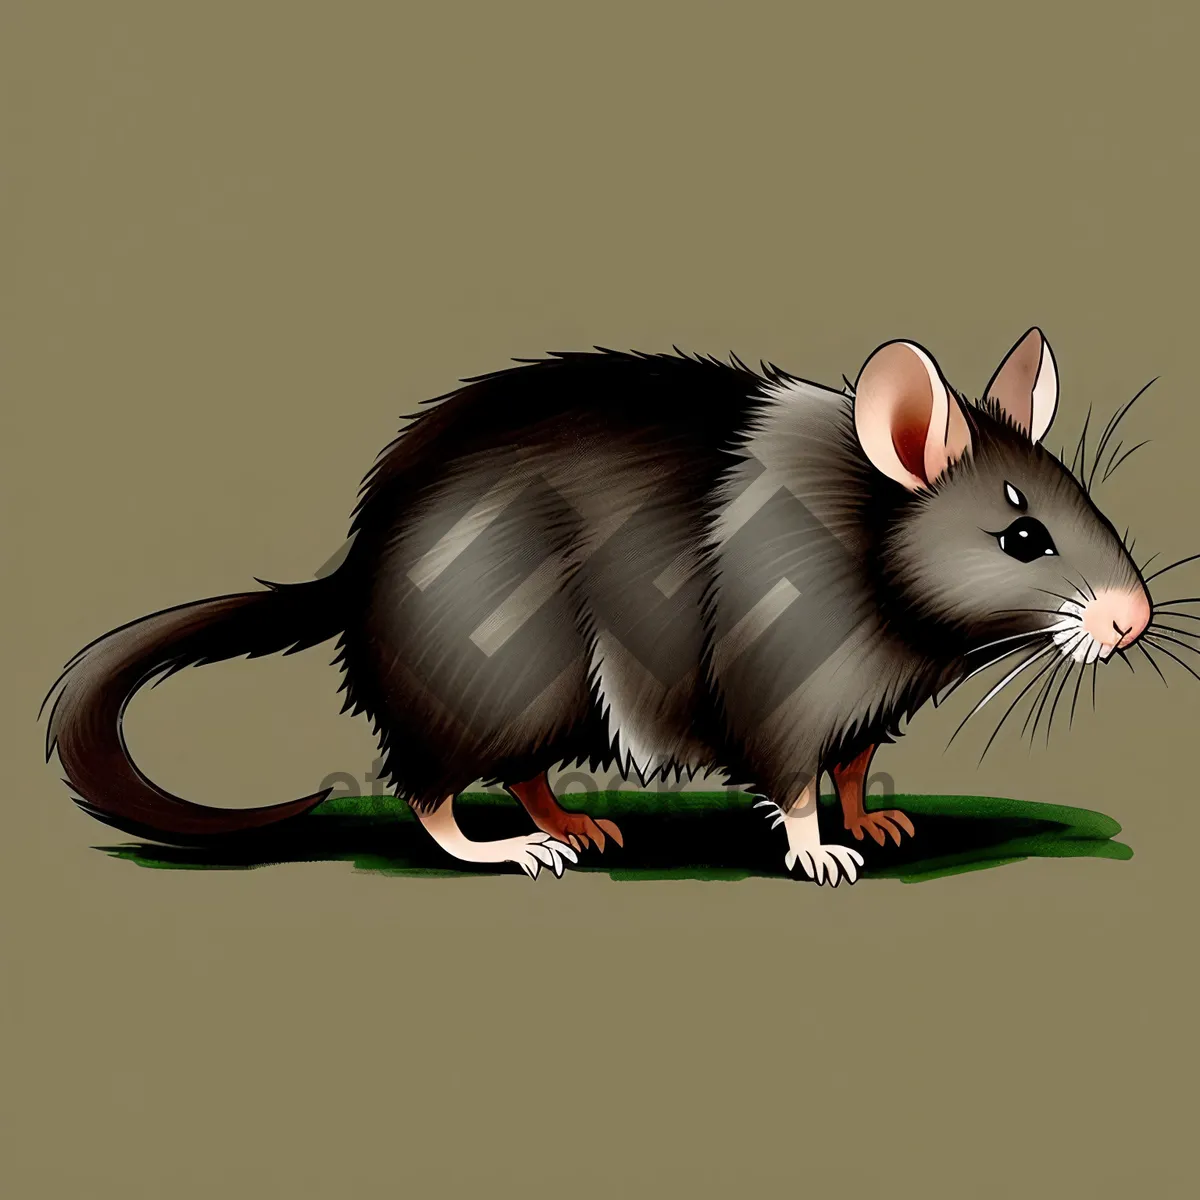 Picture of Cute Furry Rodent Portrait: Rat with Fluffy Gray Fur